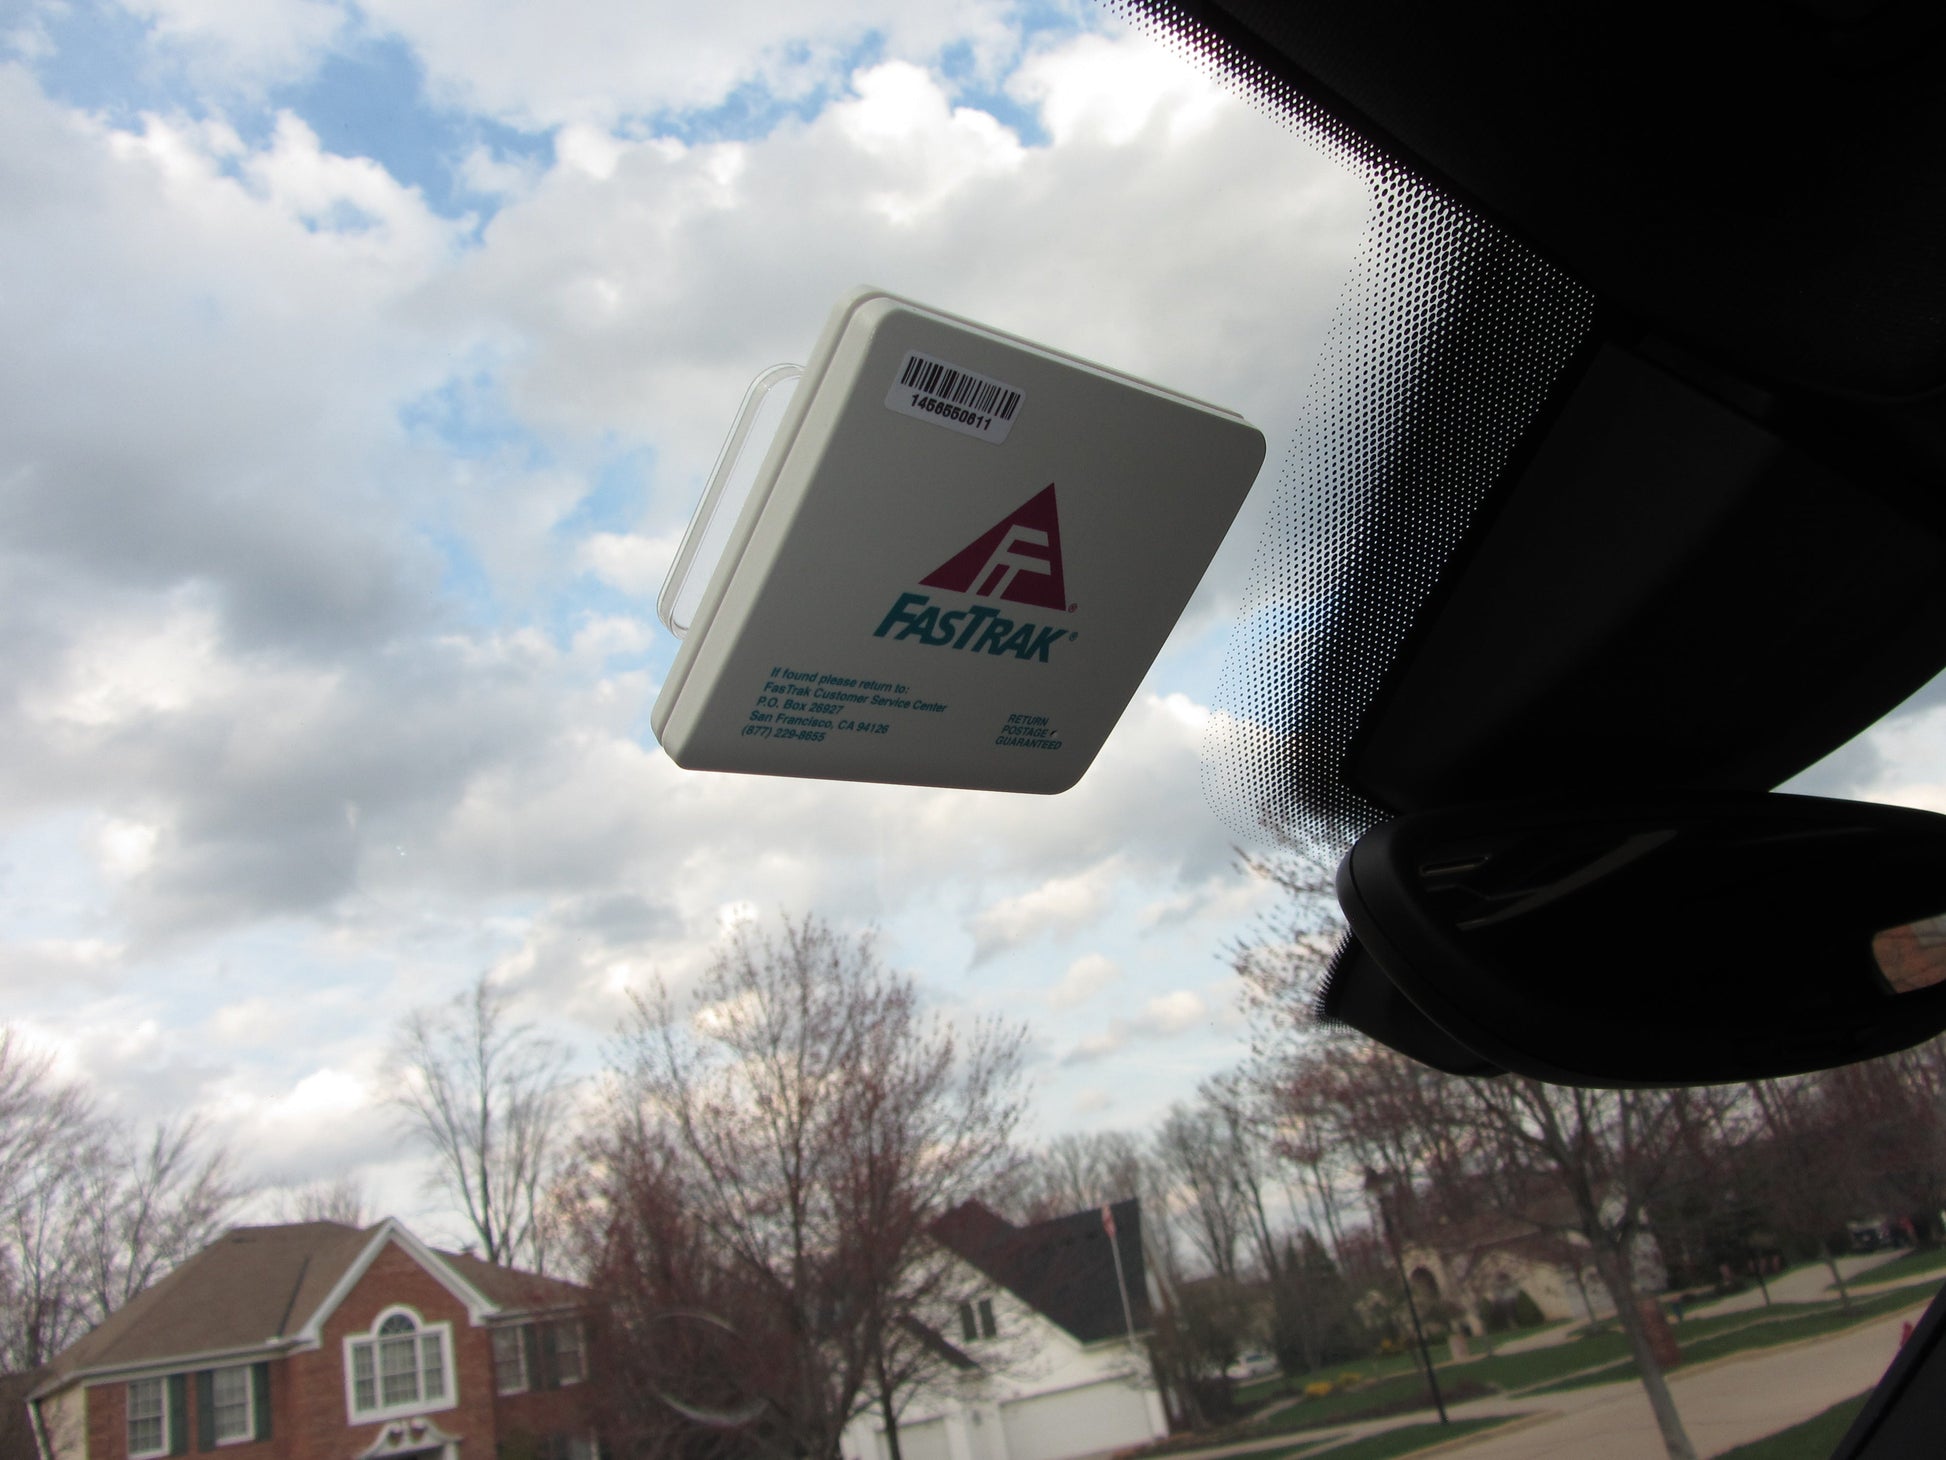 TuesdayTip - Make sure your E-ZPass Tag is properly mounted on